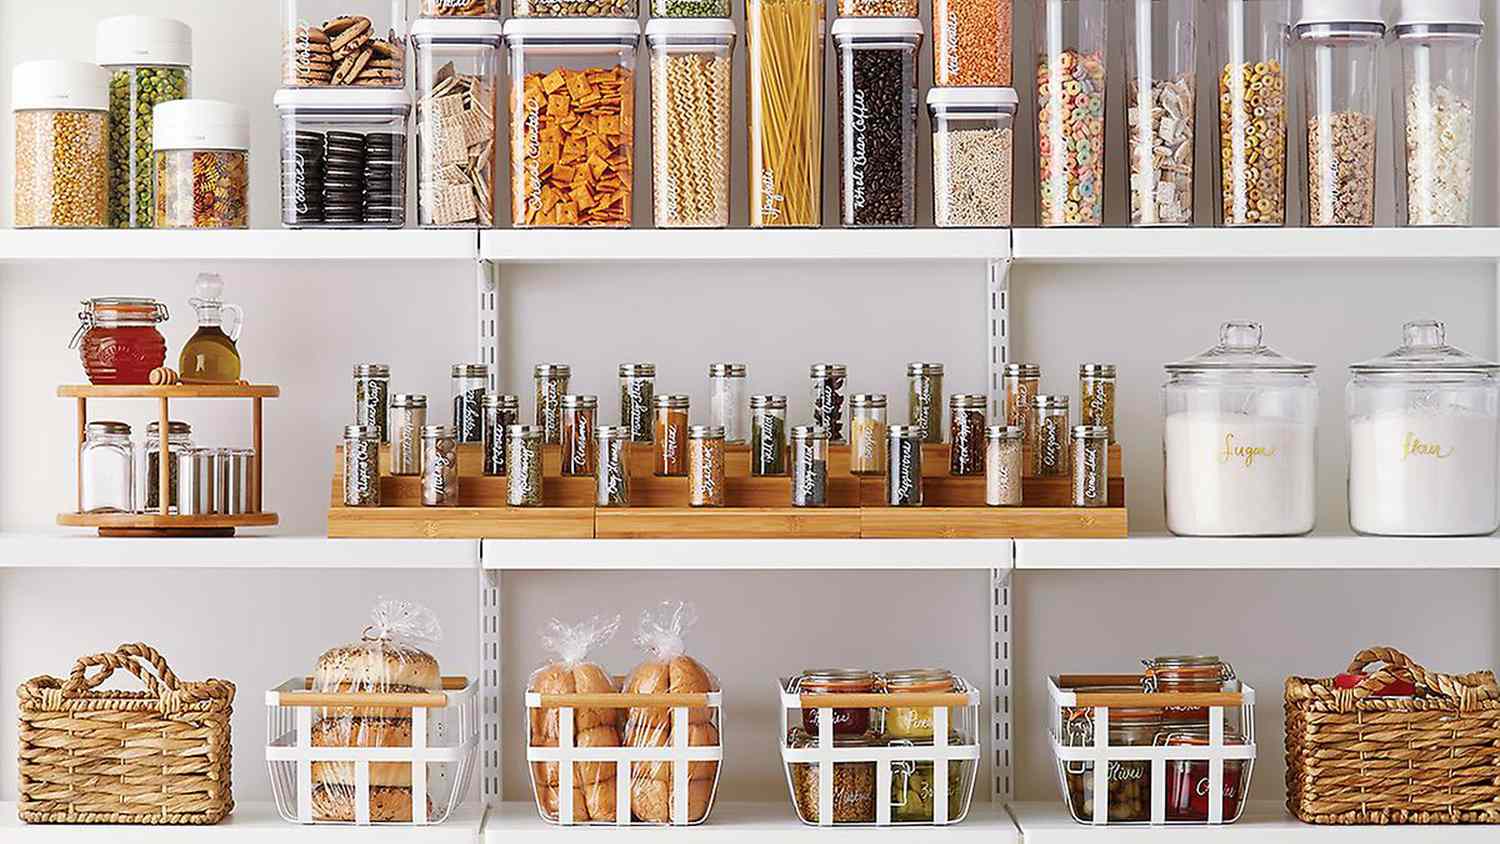 Holds 16 Large or 32 Small Spice Containers SR-02 Handmade Hardwood Ultimate Kitchen Storage Under Cabinet Spice Rack 